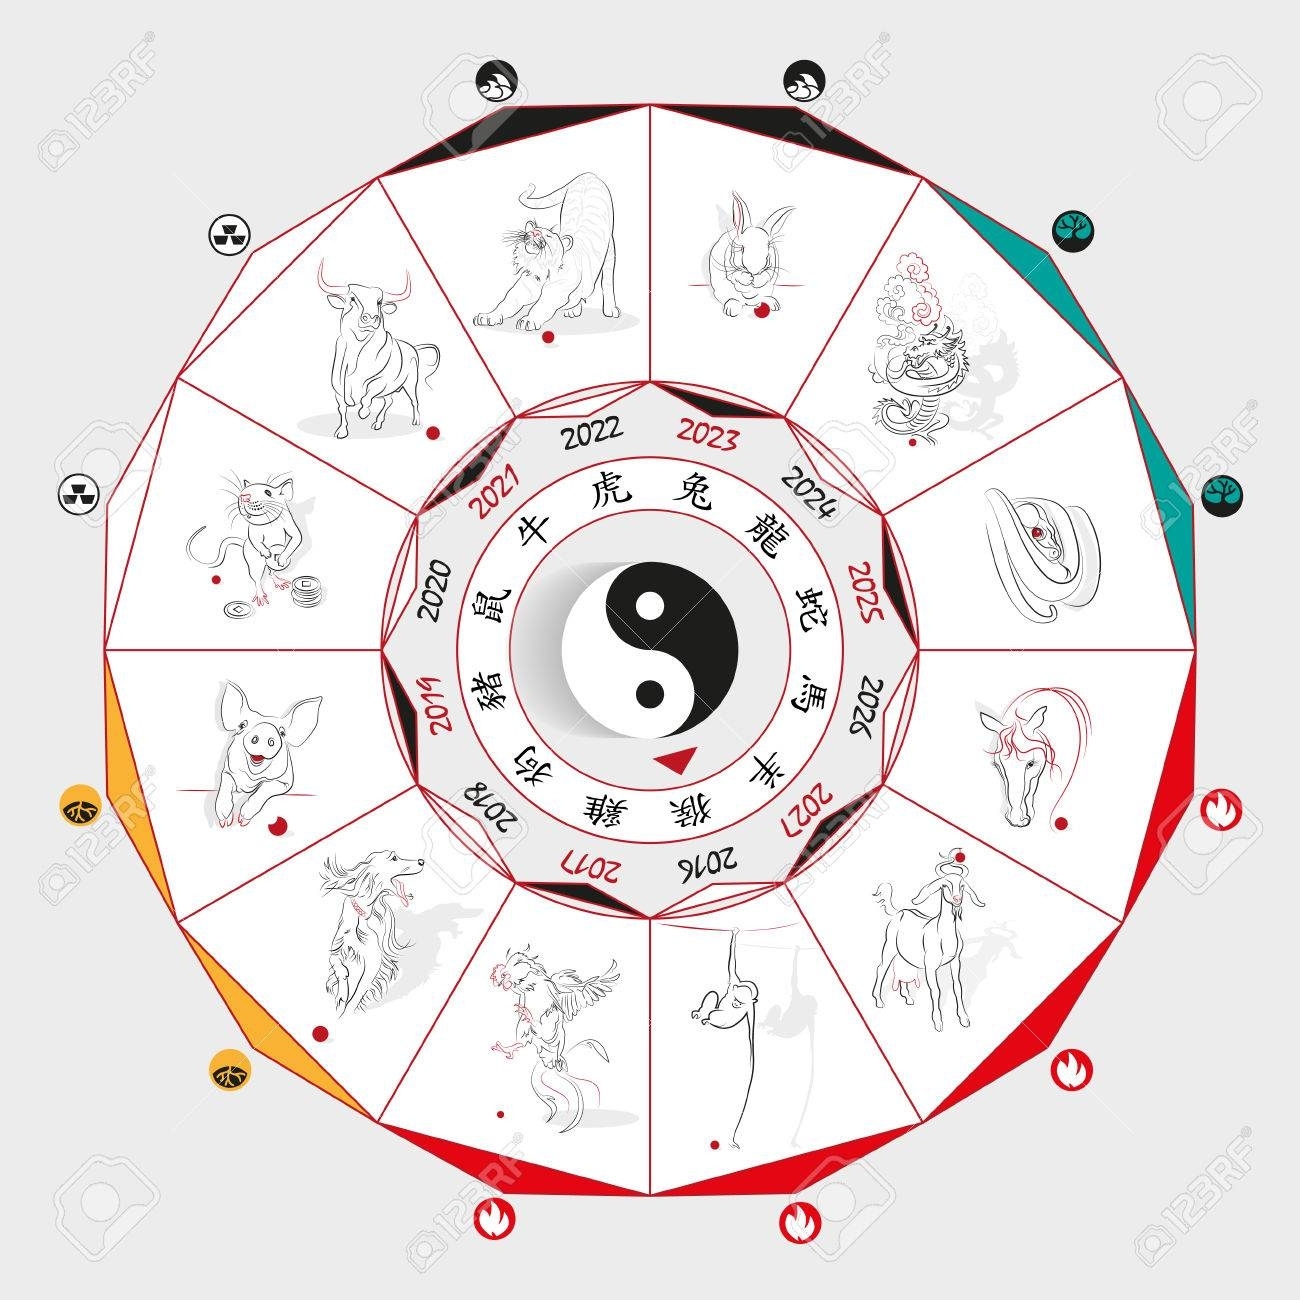 Chinese Zodiac Wheel With Signs And The Five Elements Symbols Chinese Zodiac Calendar Elements